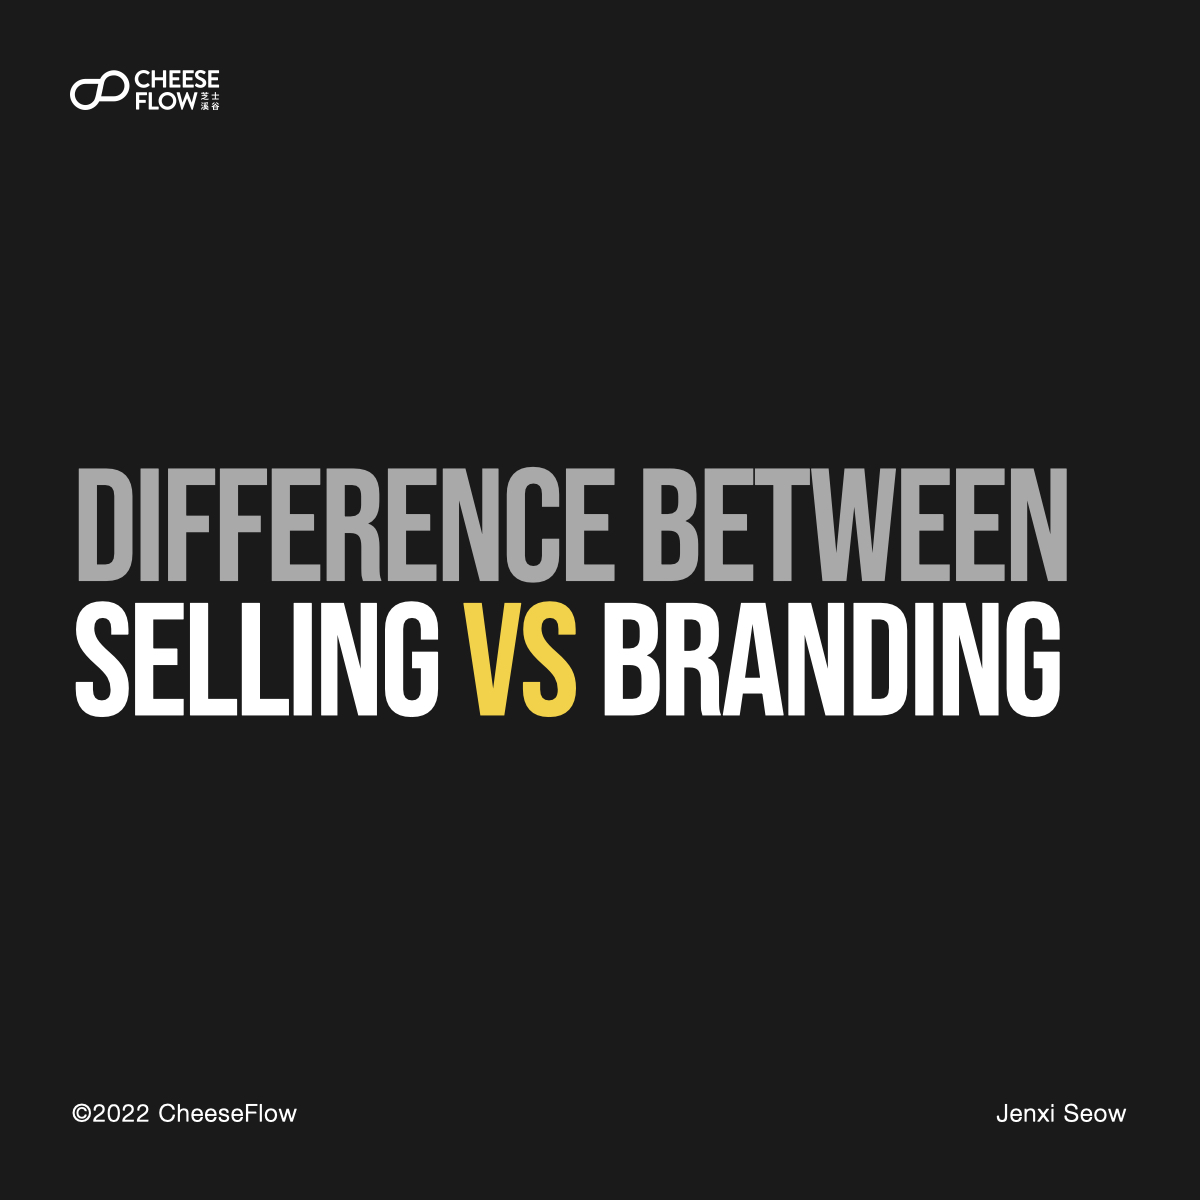 Difference between selling and branding